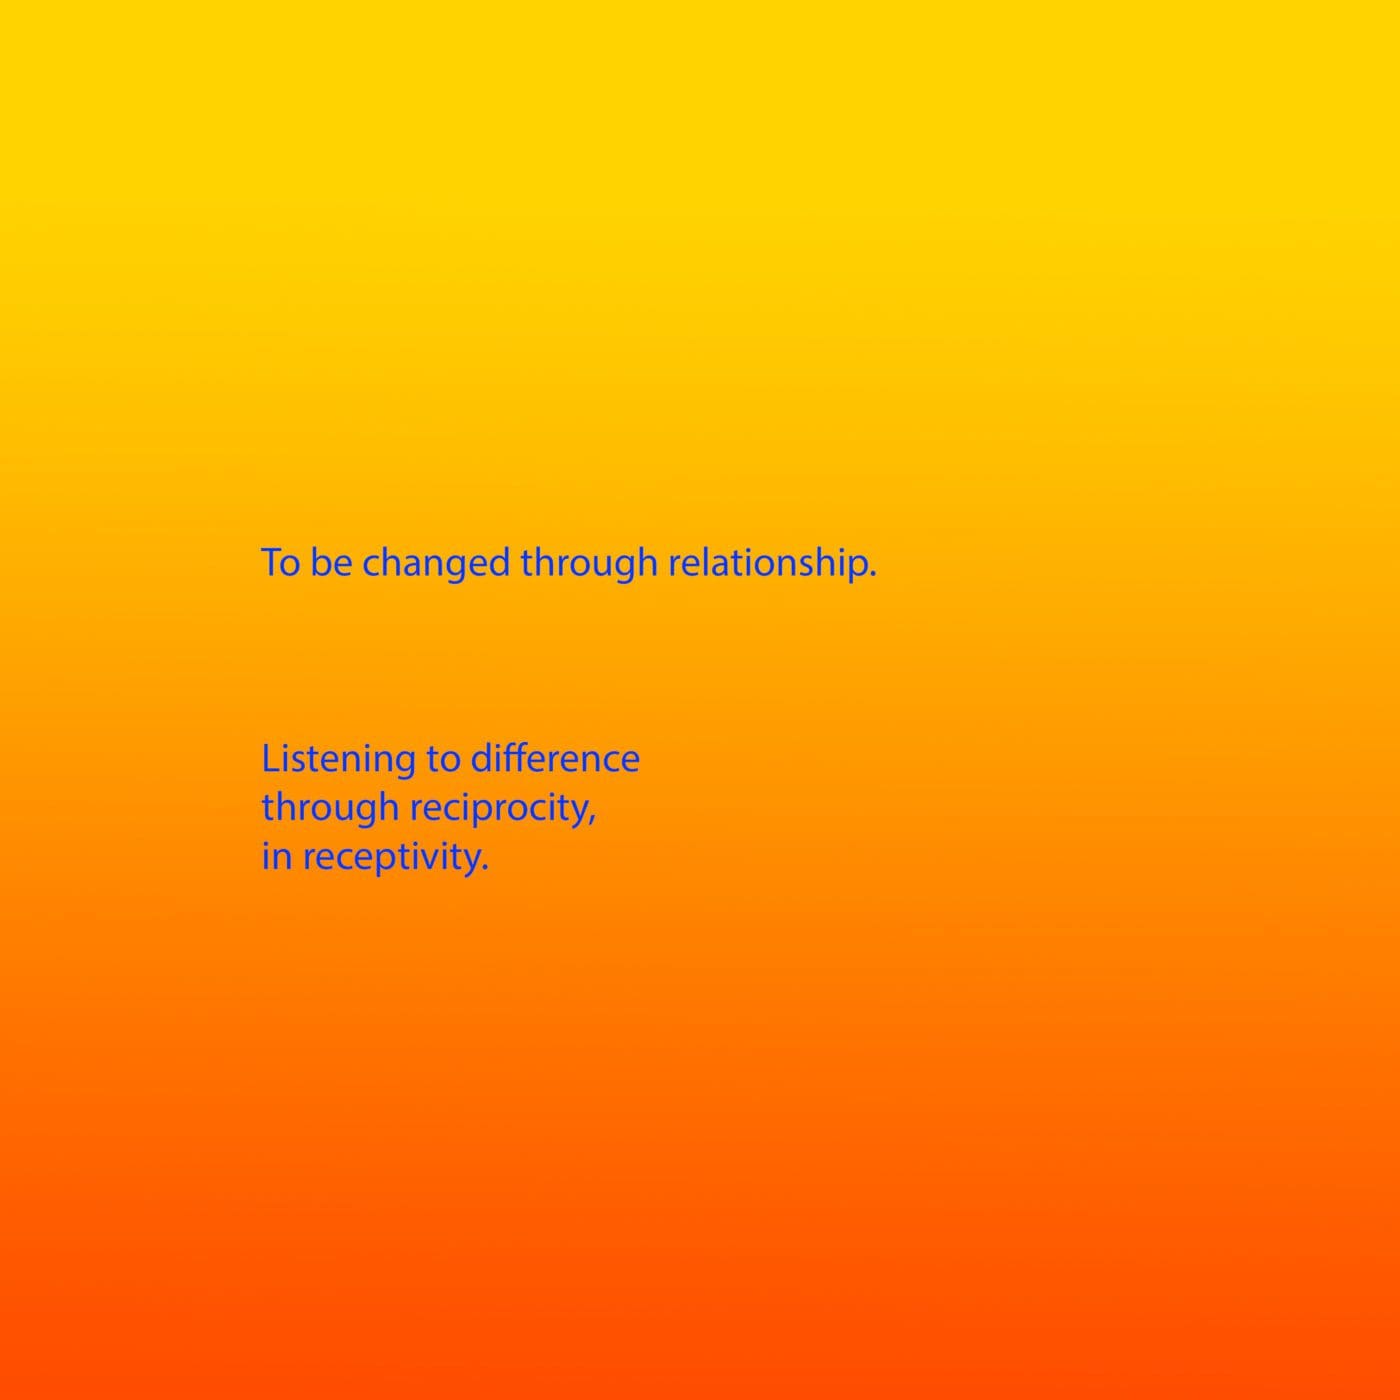 Bright blue text appears on a background that is a gradient from yellow, through orange to red. The text reads: To be changed through relationship. Listening to difference through reciprocity, in receptivity.